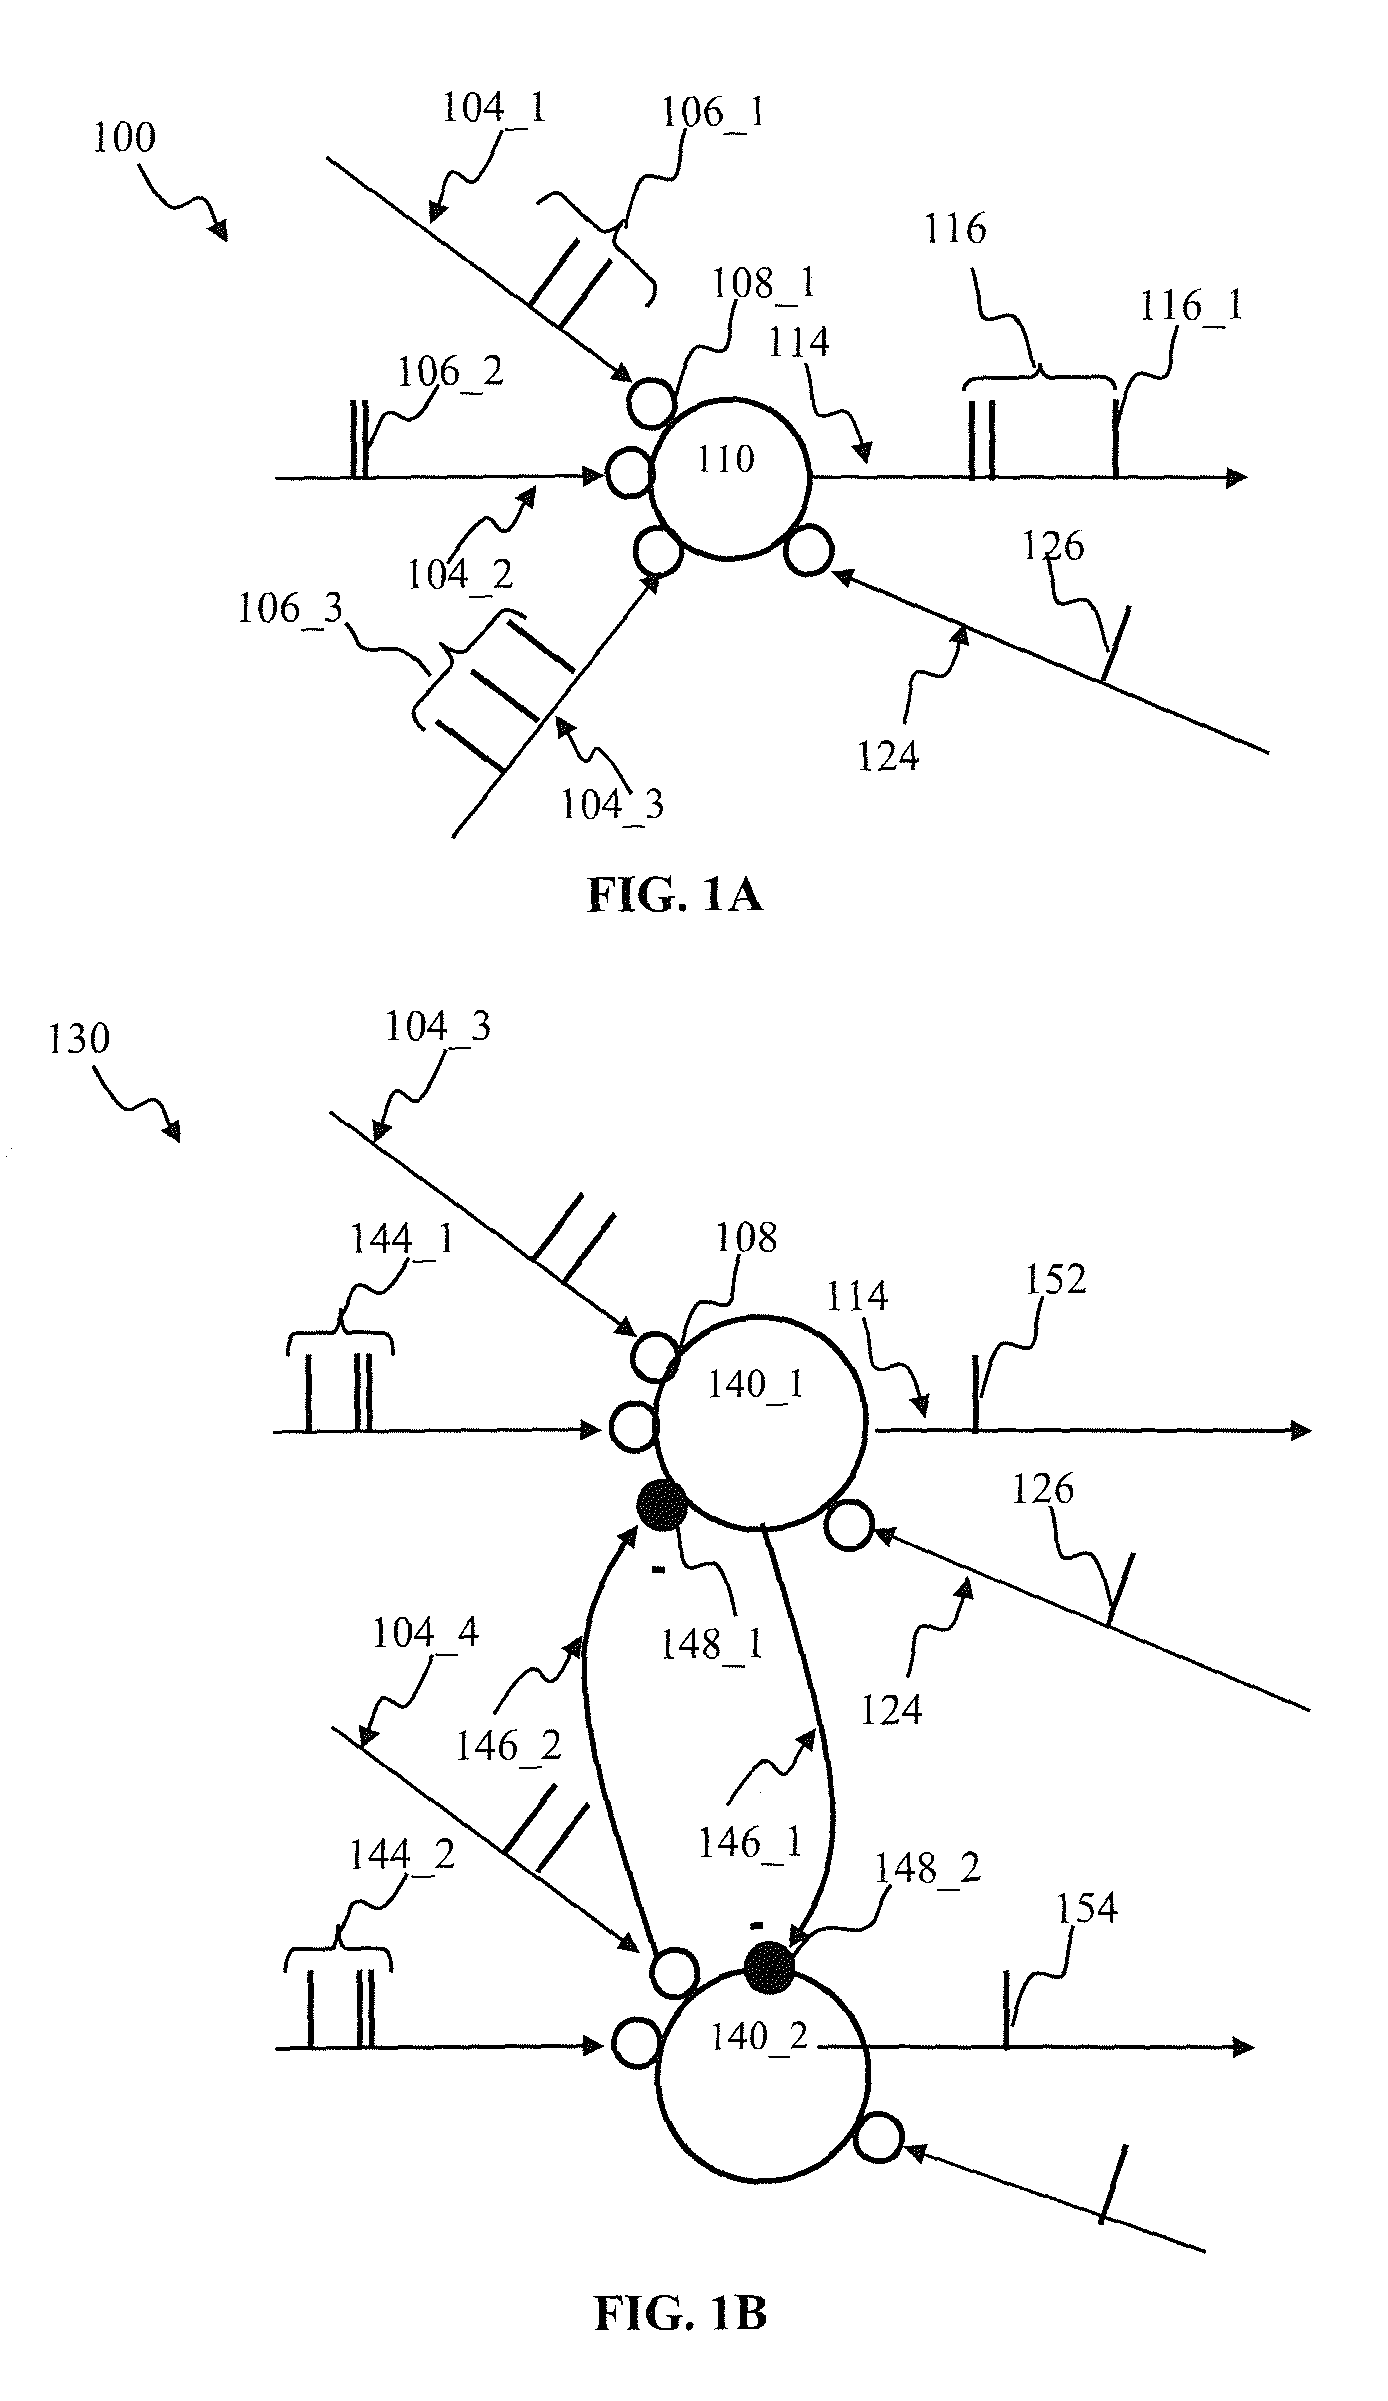 Modulated plasticity apparatus and methods for spiking neuron network